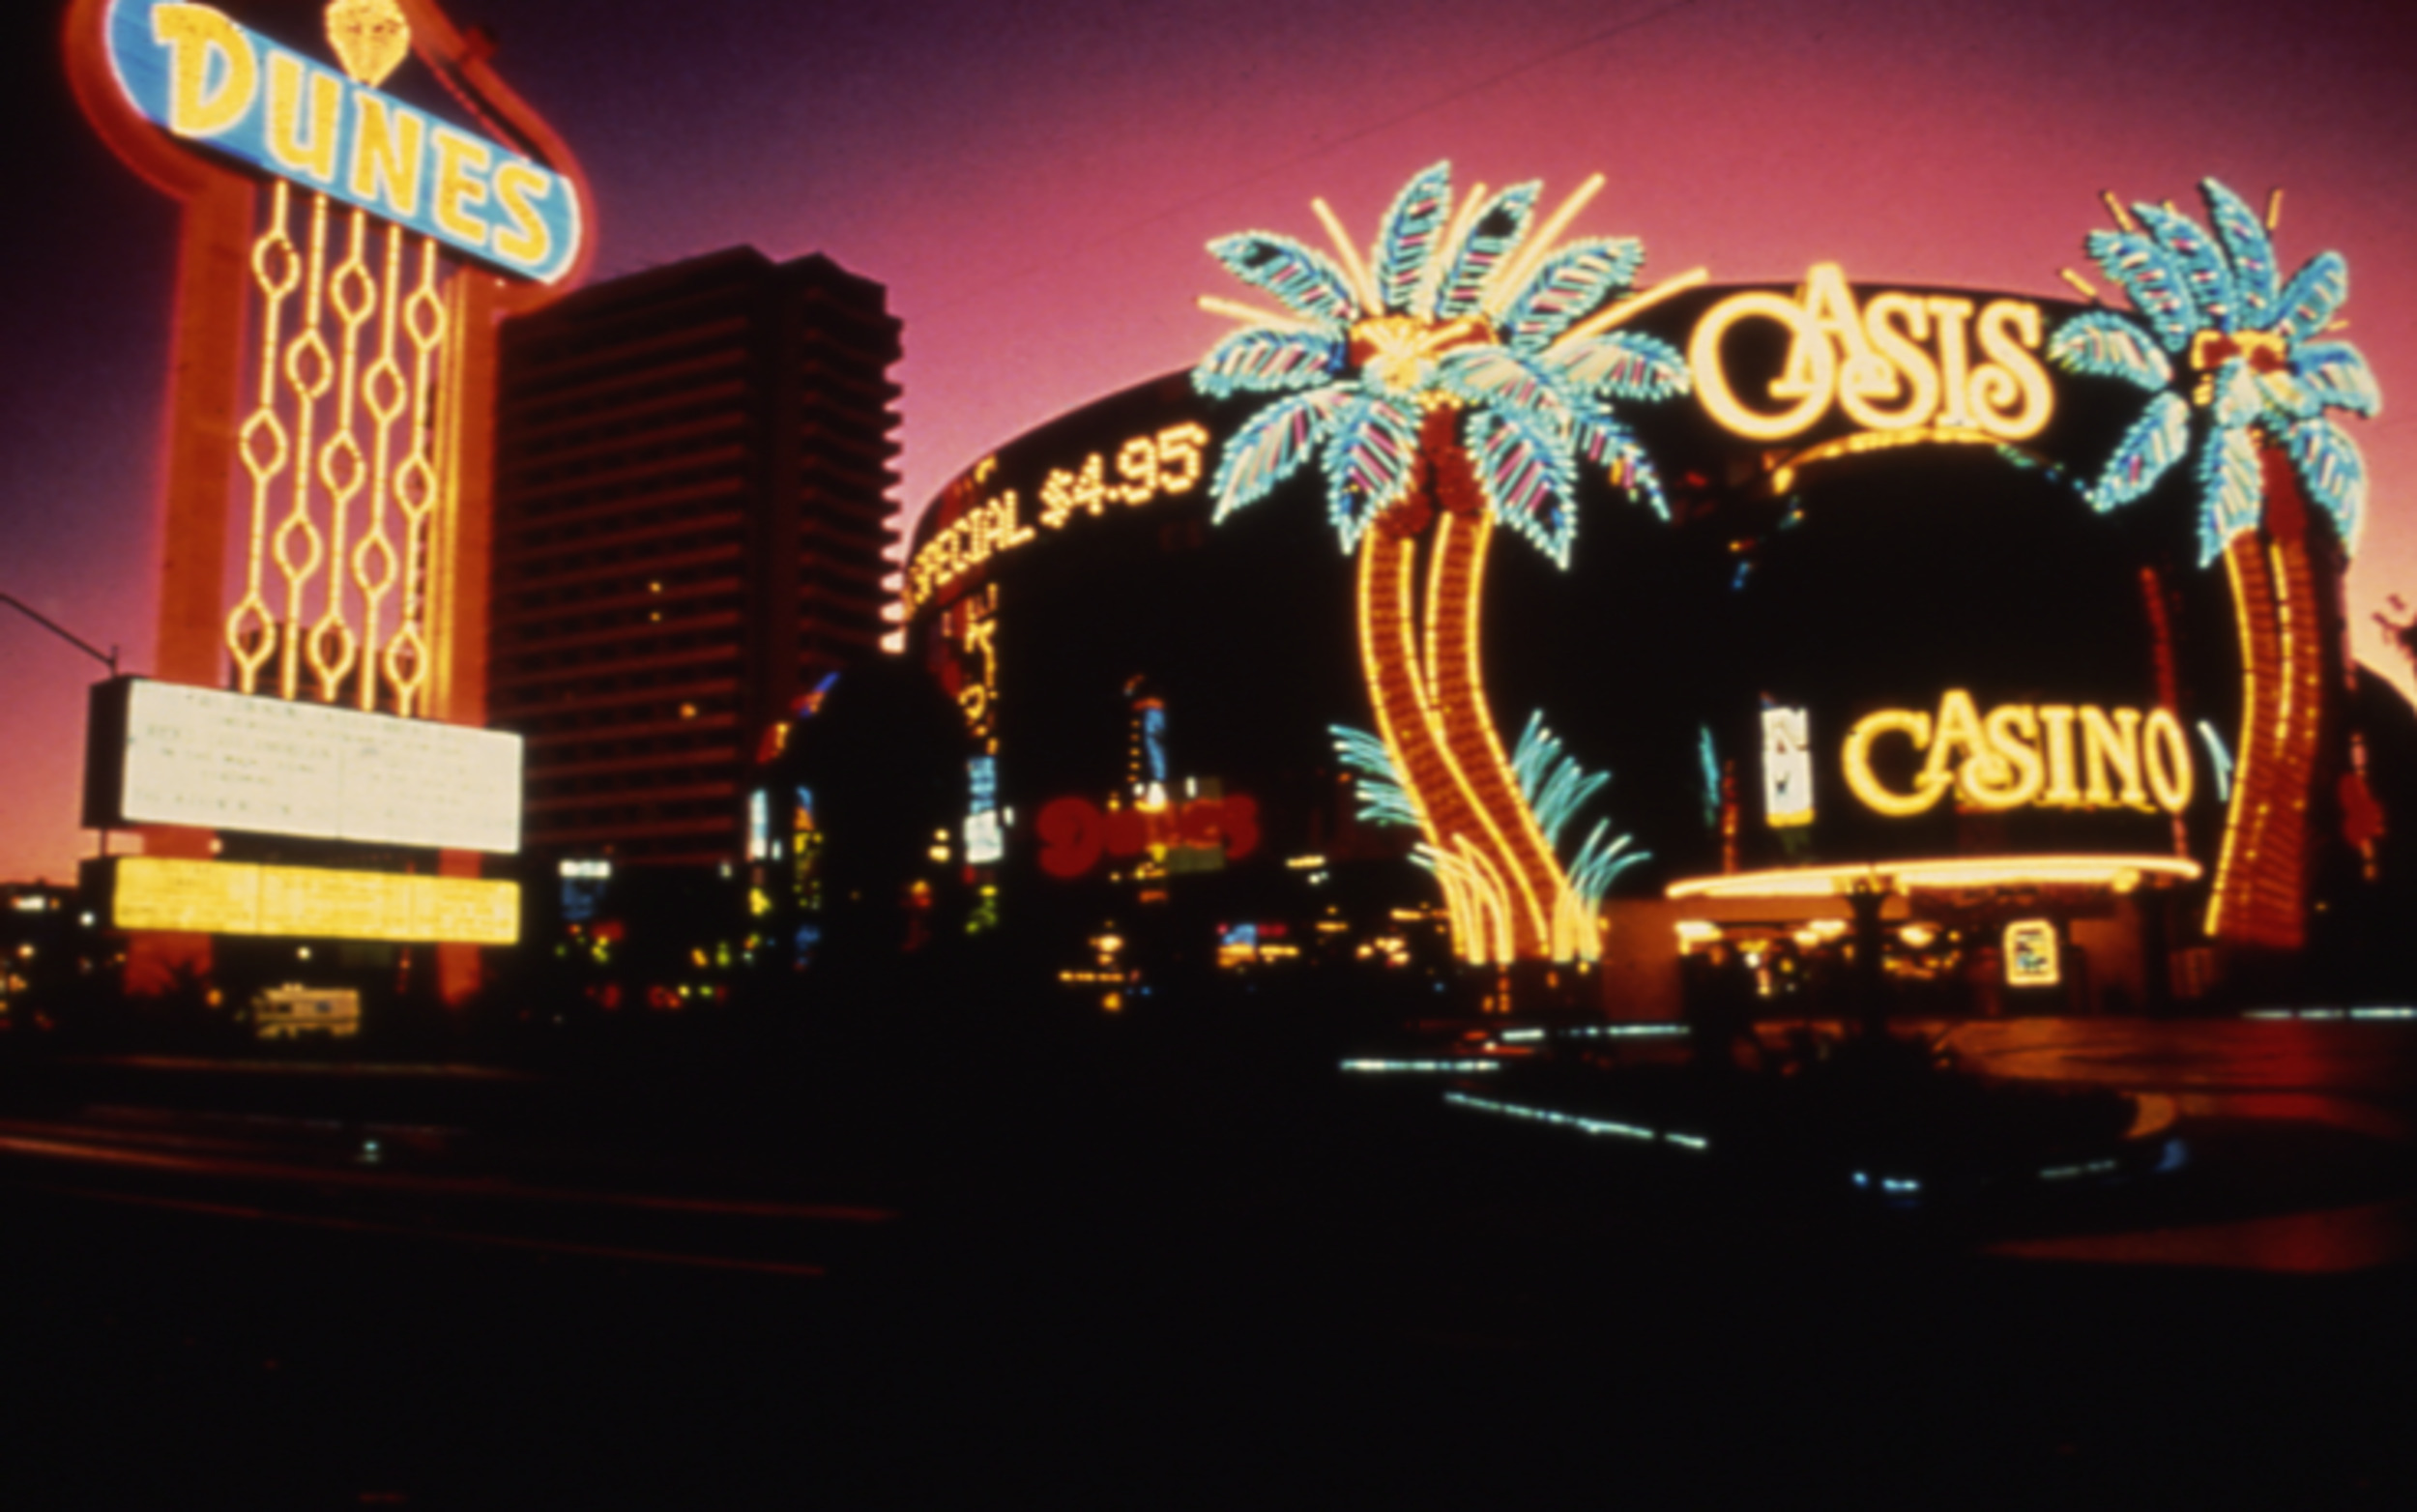 Slide of The Dunes and Oasis Casino, Las Vegas, 1986